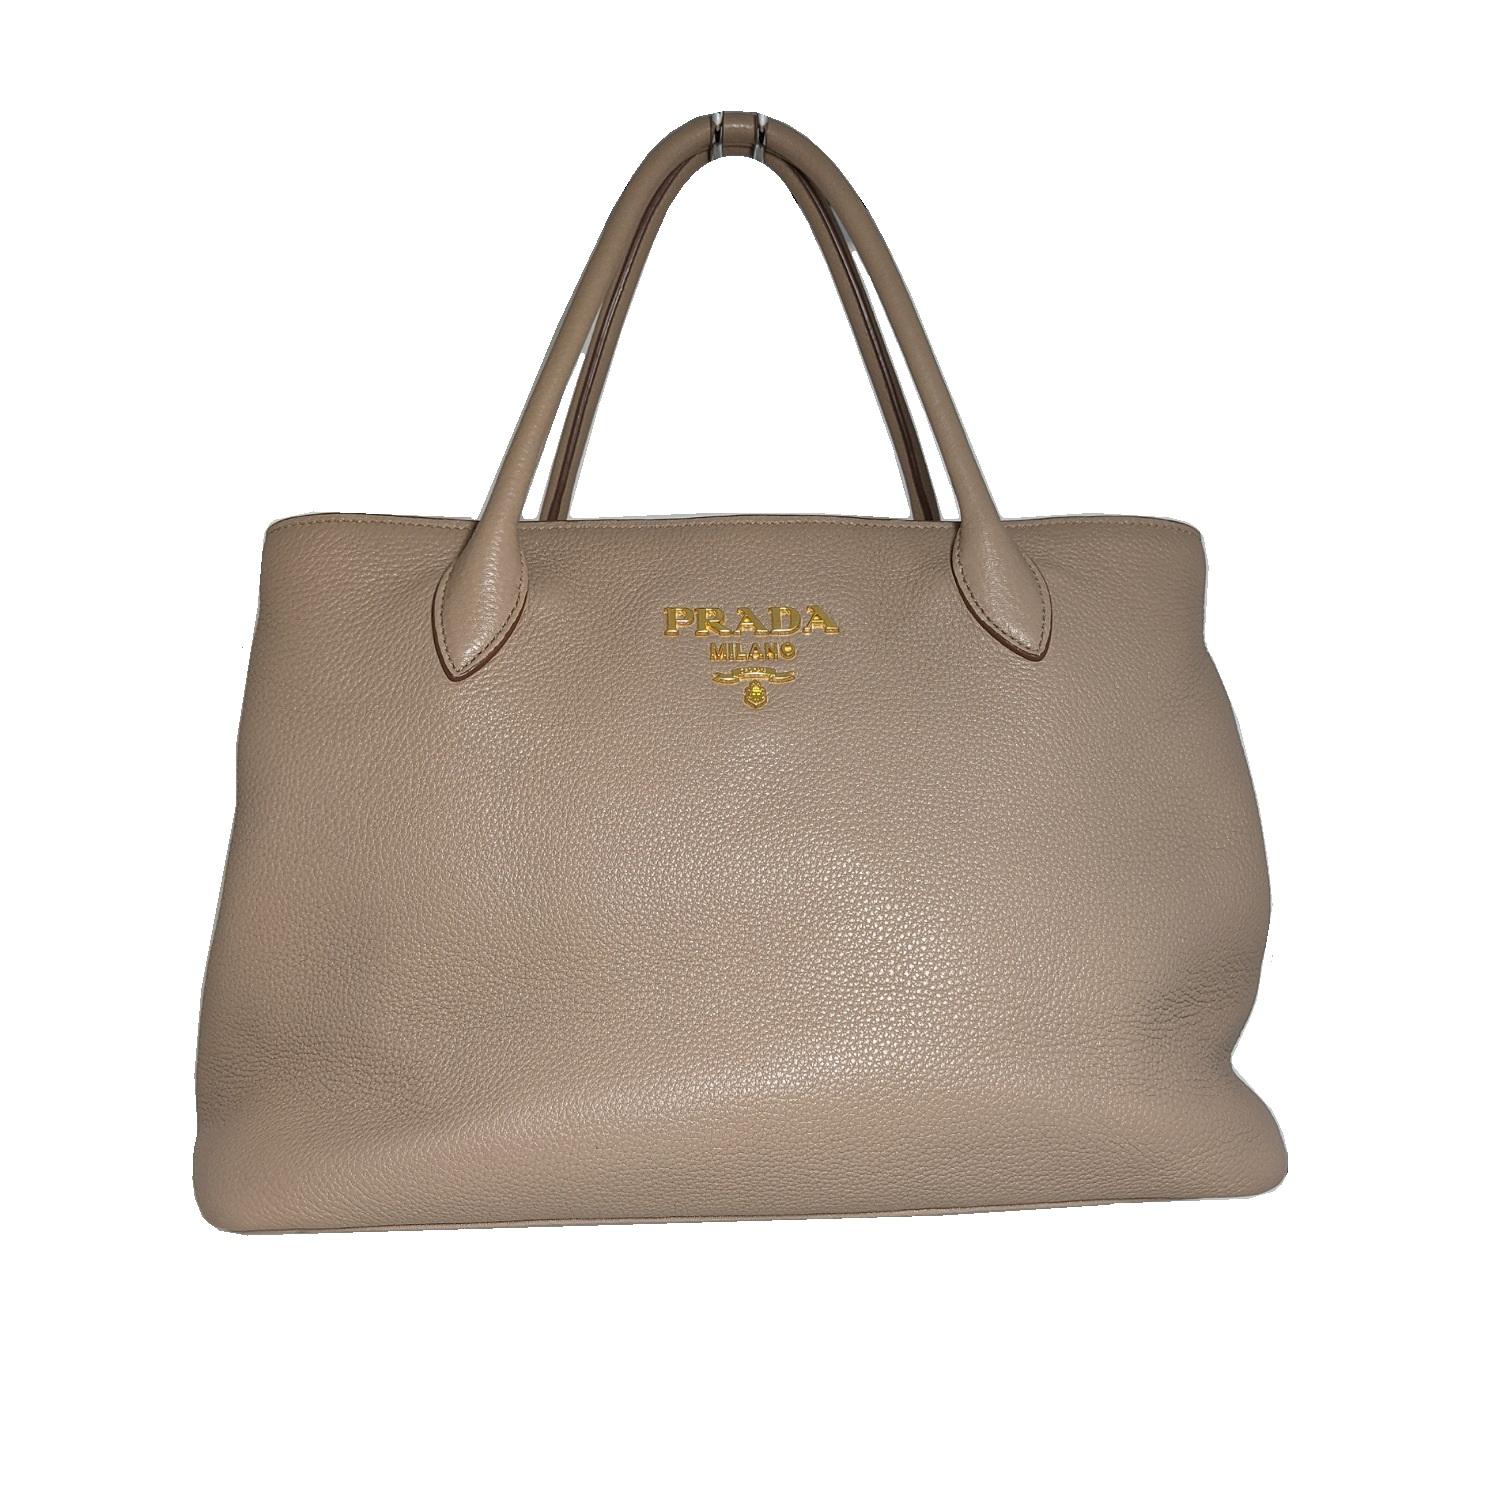 The Prada Pebbled Leather Vitello Daino Tote Bag BN2579 is one sophisticated piece. This durable and spacious tote has the capability to hold all your daily essentials and more. It is made of gorgeous cameo beige pebbled Daino calfskin leather with